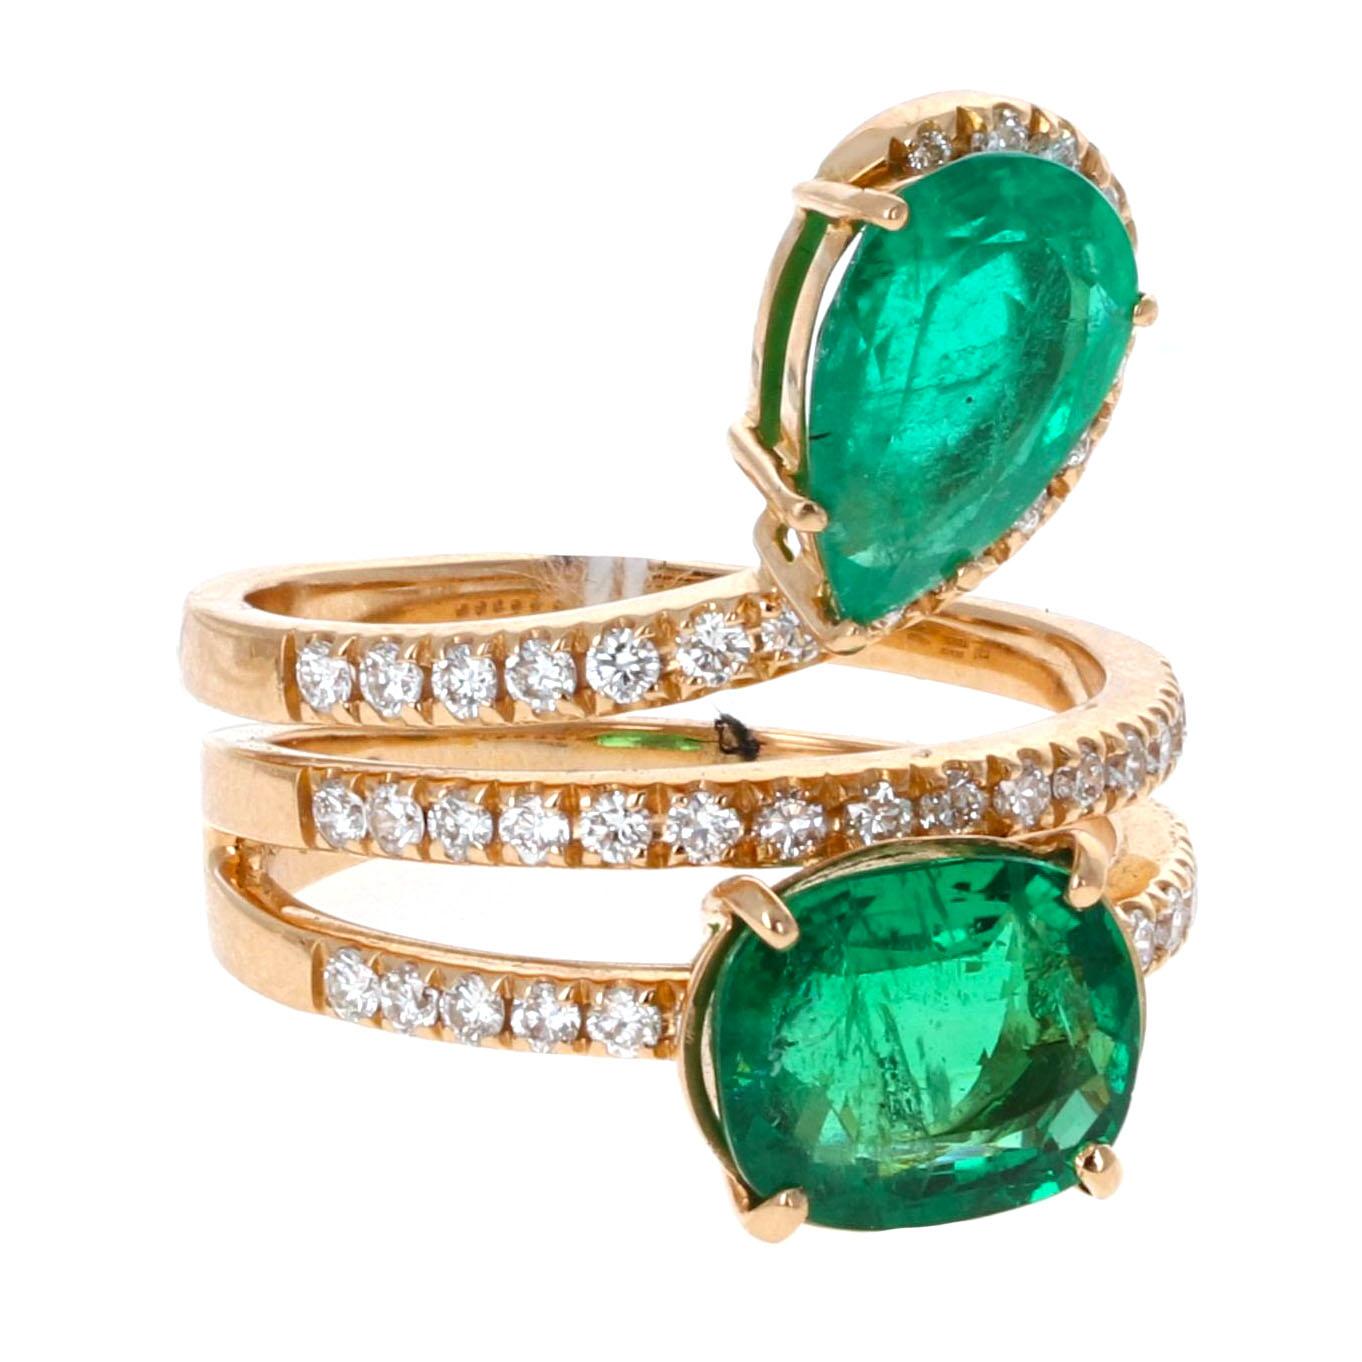 18 Karat rose gold emerald and diamond by-pass ring. This eye-catching piece features a striking three-tiered design with 2 vibrant emeralds weighing a total of 4.50 carats. The pear and oval-cut emeralds are accented by 0.30 carats of round